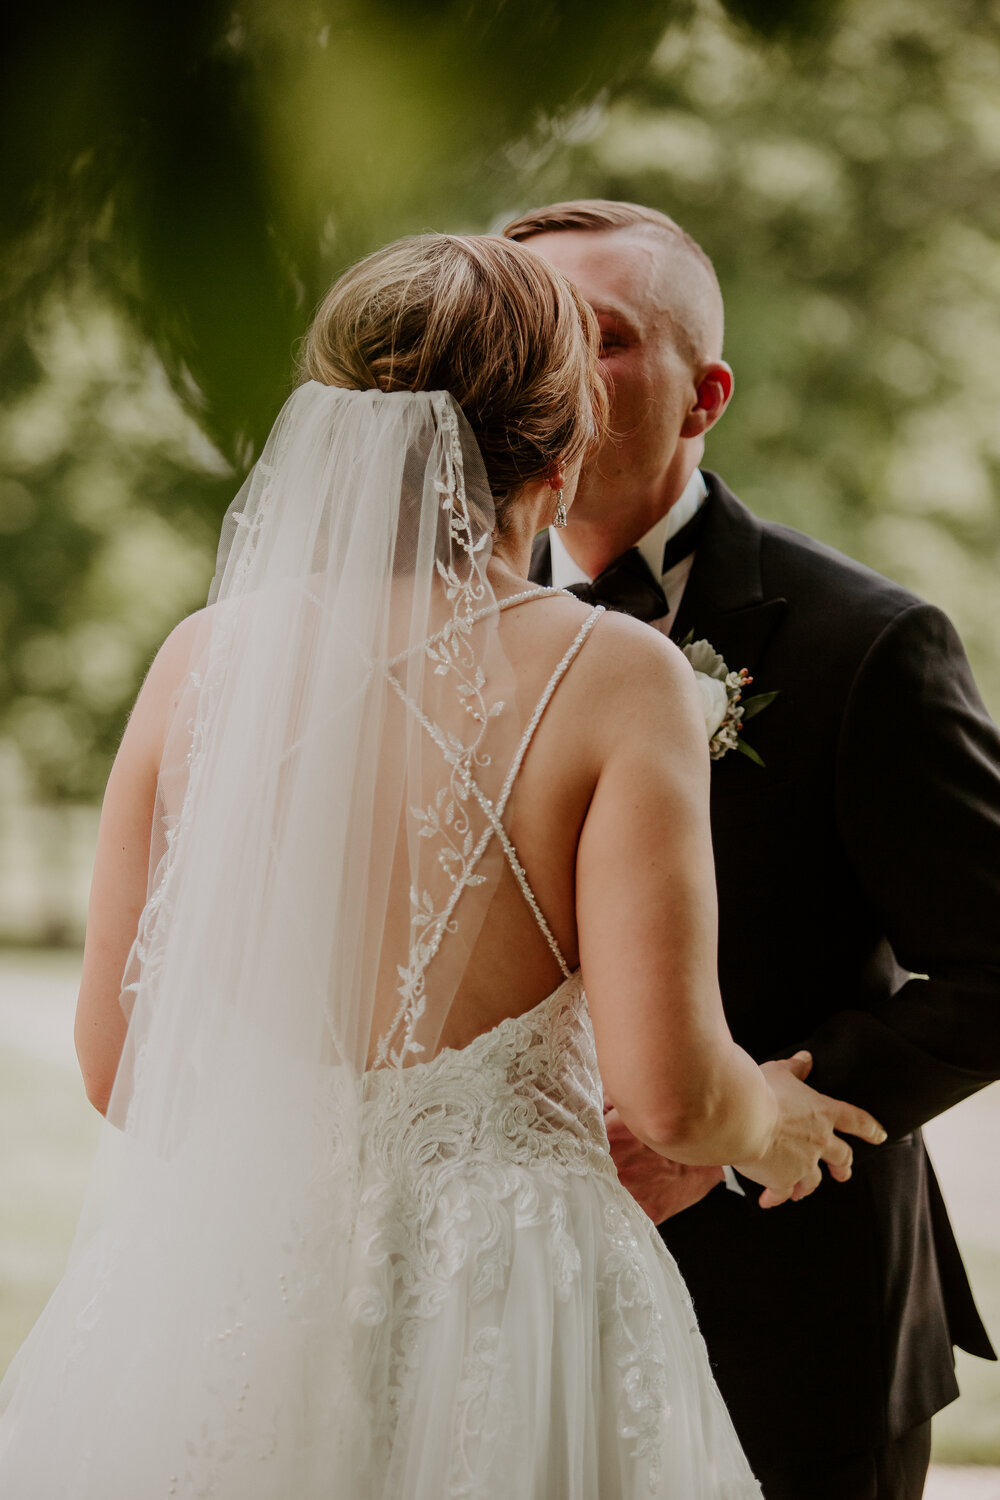 I vow to you - The details on this Stella York gown is gorgeous